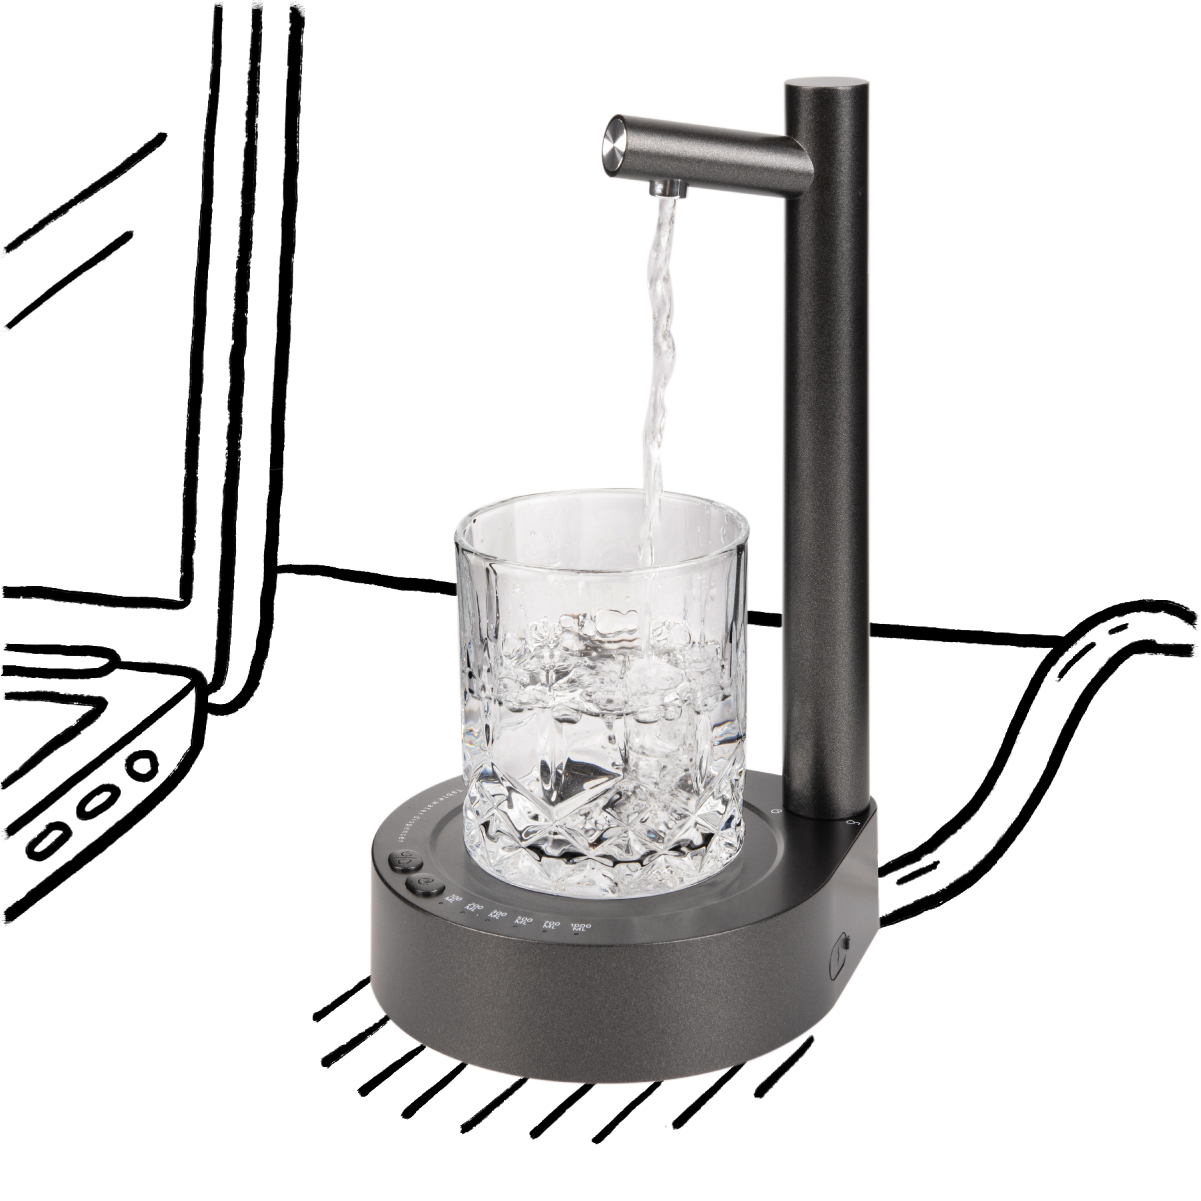 black desktop water dispenser with black line illustration of laptop and water tube attached to water dispenser